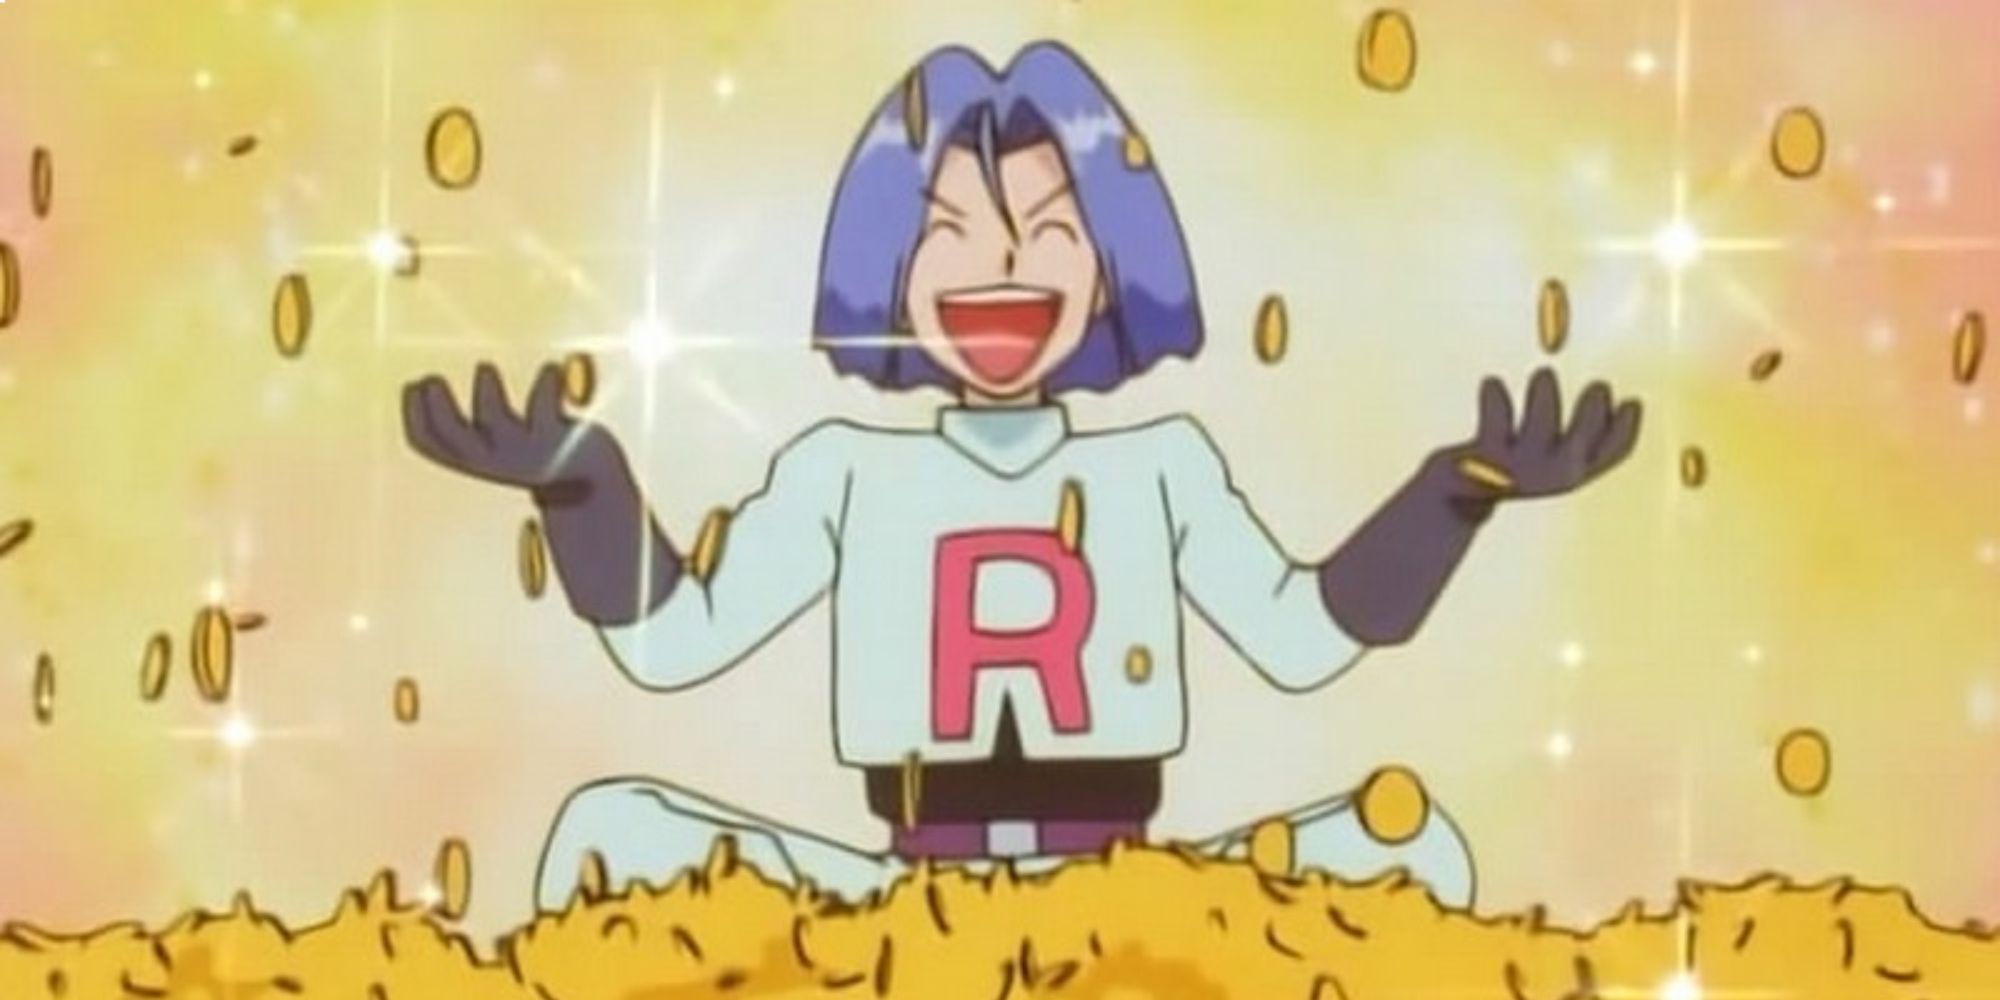 Fictional Currencies a mid shot of James from the Pokemon anime grinning with his arms raised as money pours from above